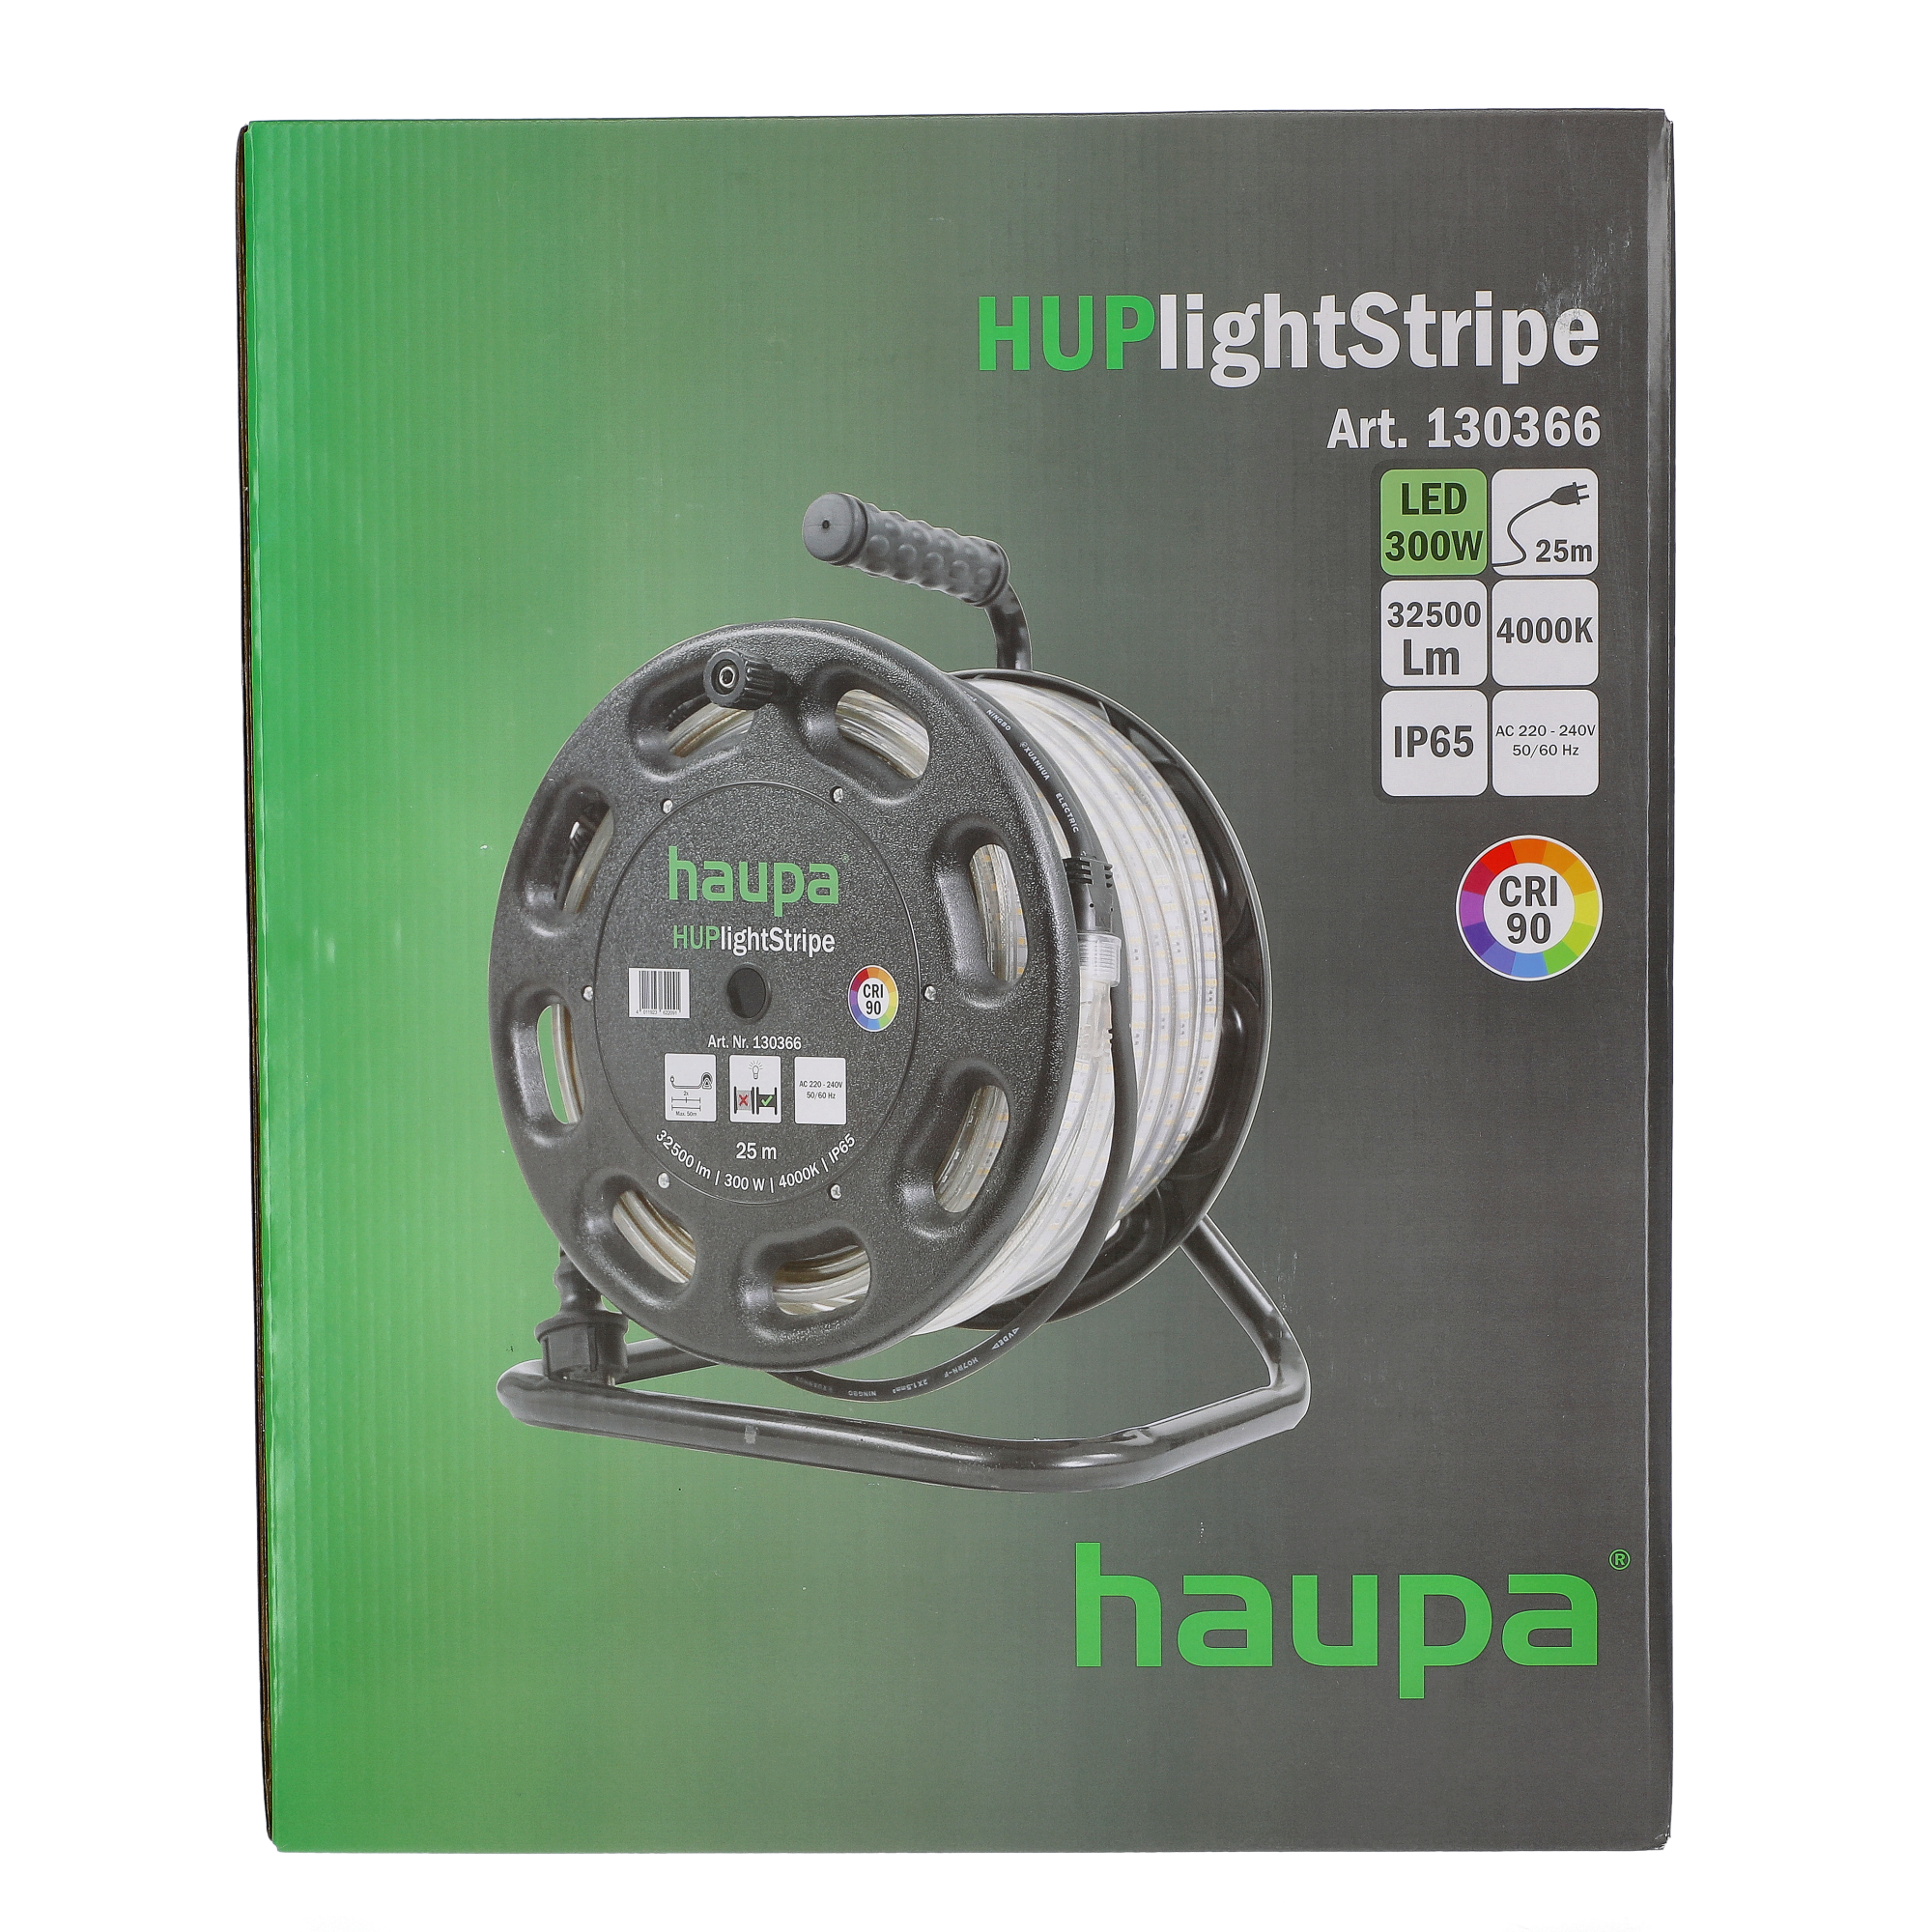 LED-Lichtband 'HUPlightstripe 25' 25 m + product picture